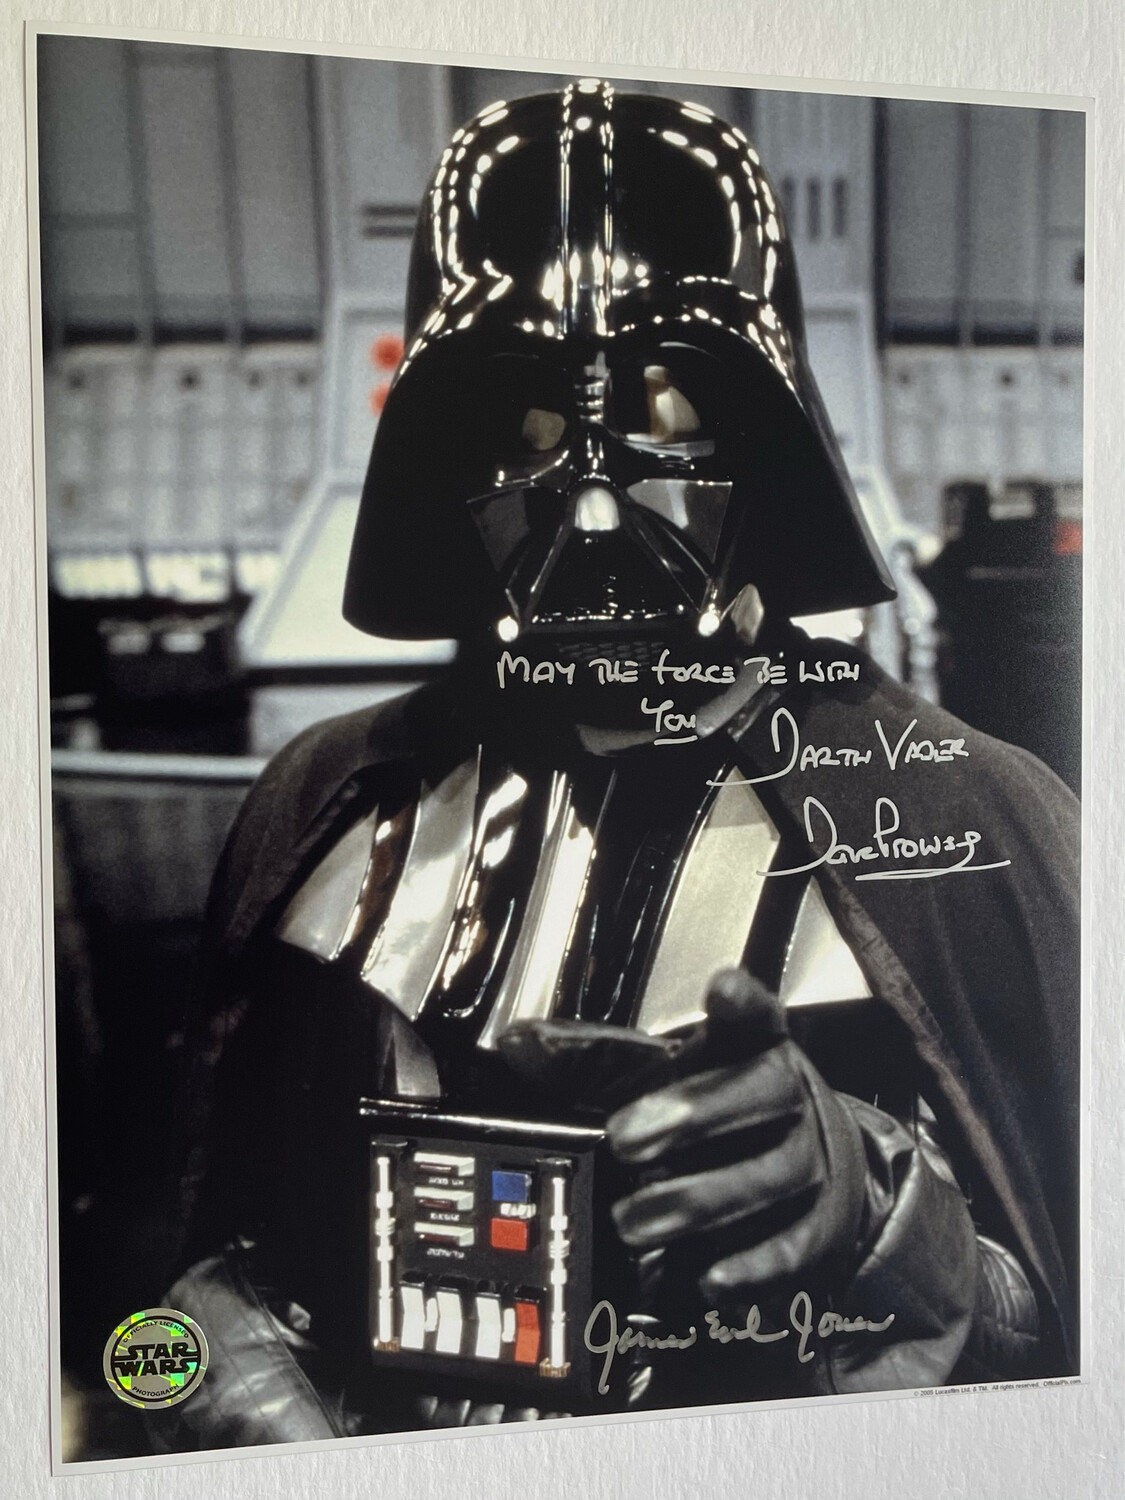 11X14 DARTH VADER PHOTO SIGNED BY DAVE PROWSE AND JAMES EARL JONES